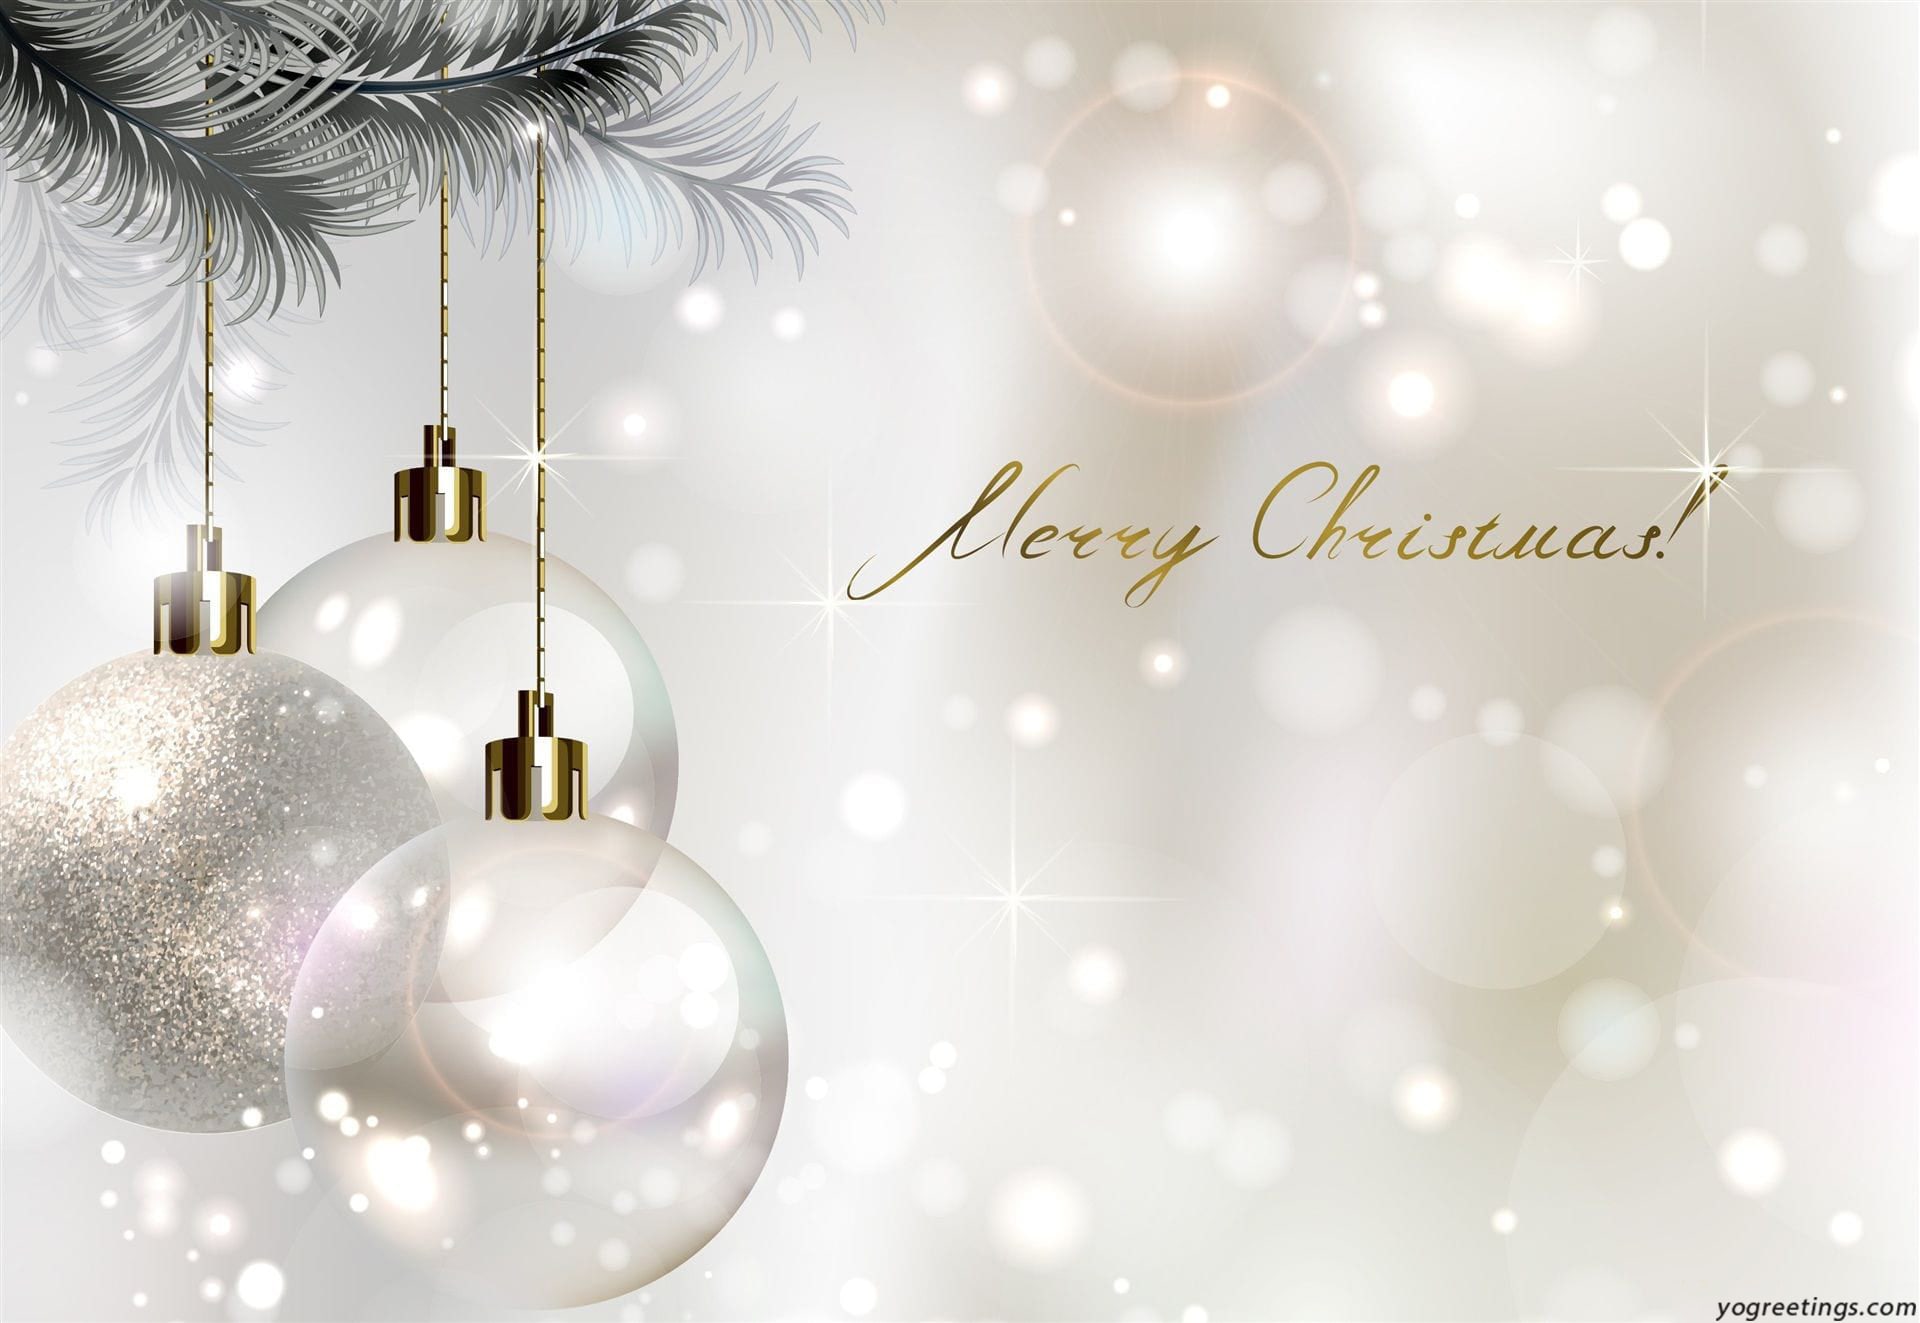 Merry Christmas Wallpaper Full HD Free Download